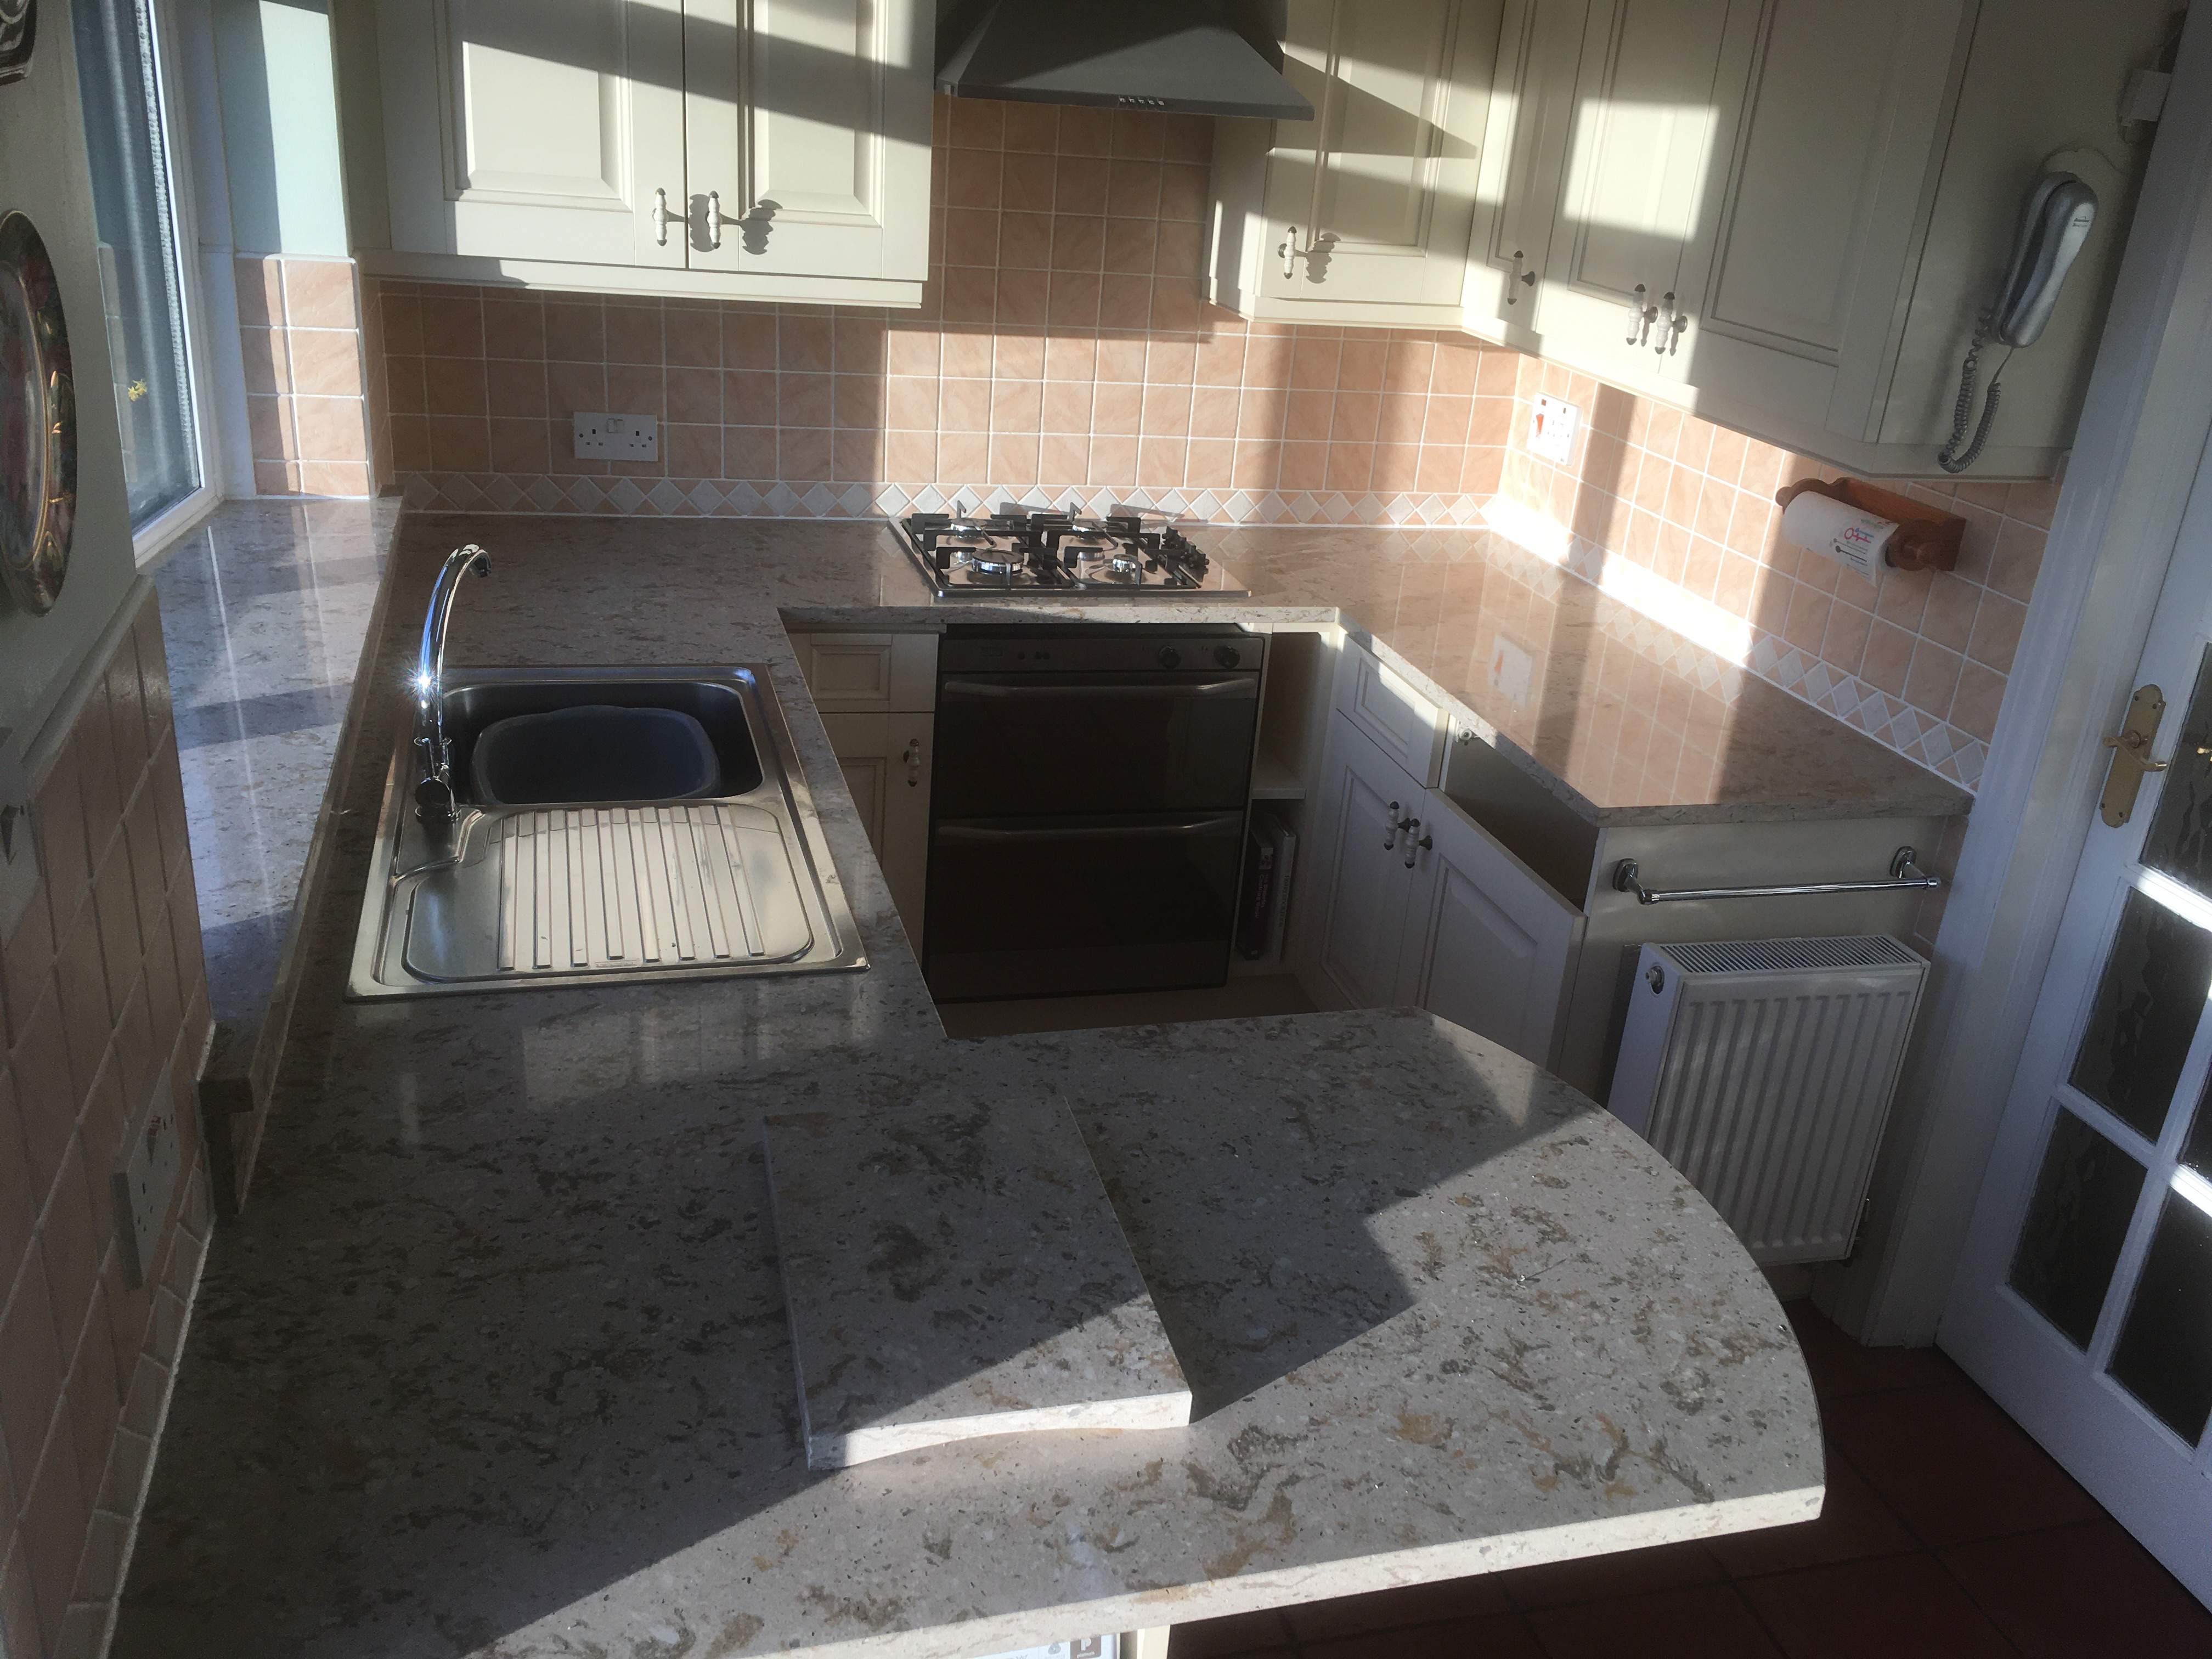 this is part of a kitchen makeover with new worktops in composite quartz